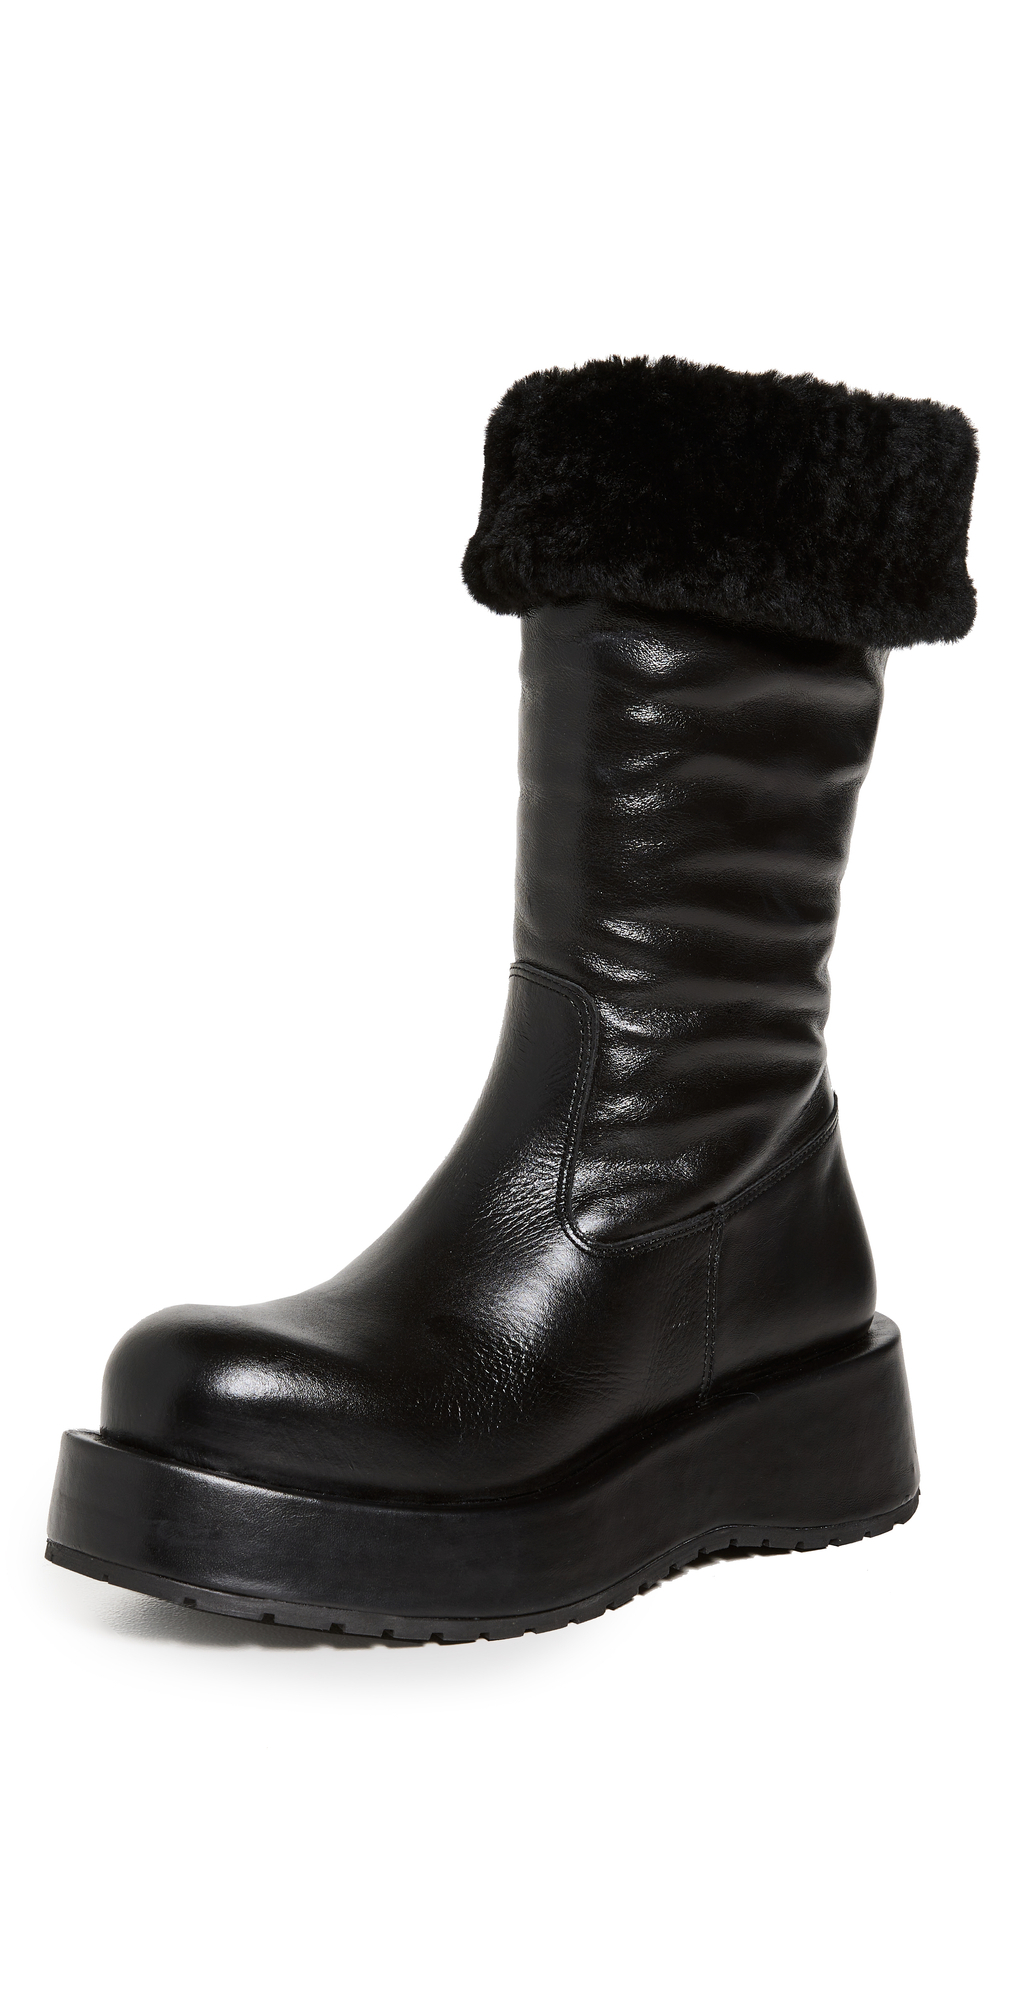 Paloma Barcelo Maelle Boots in black